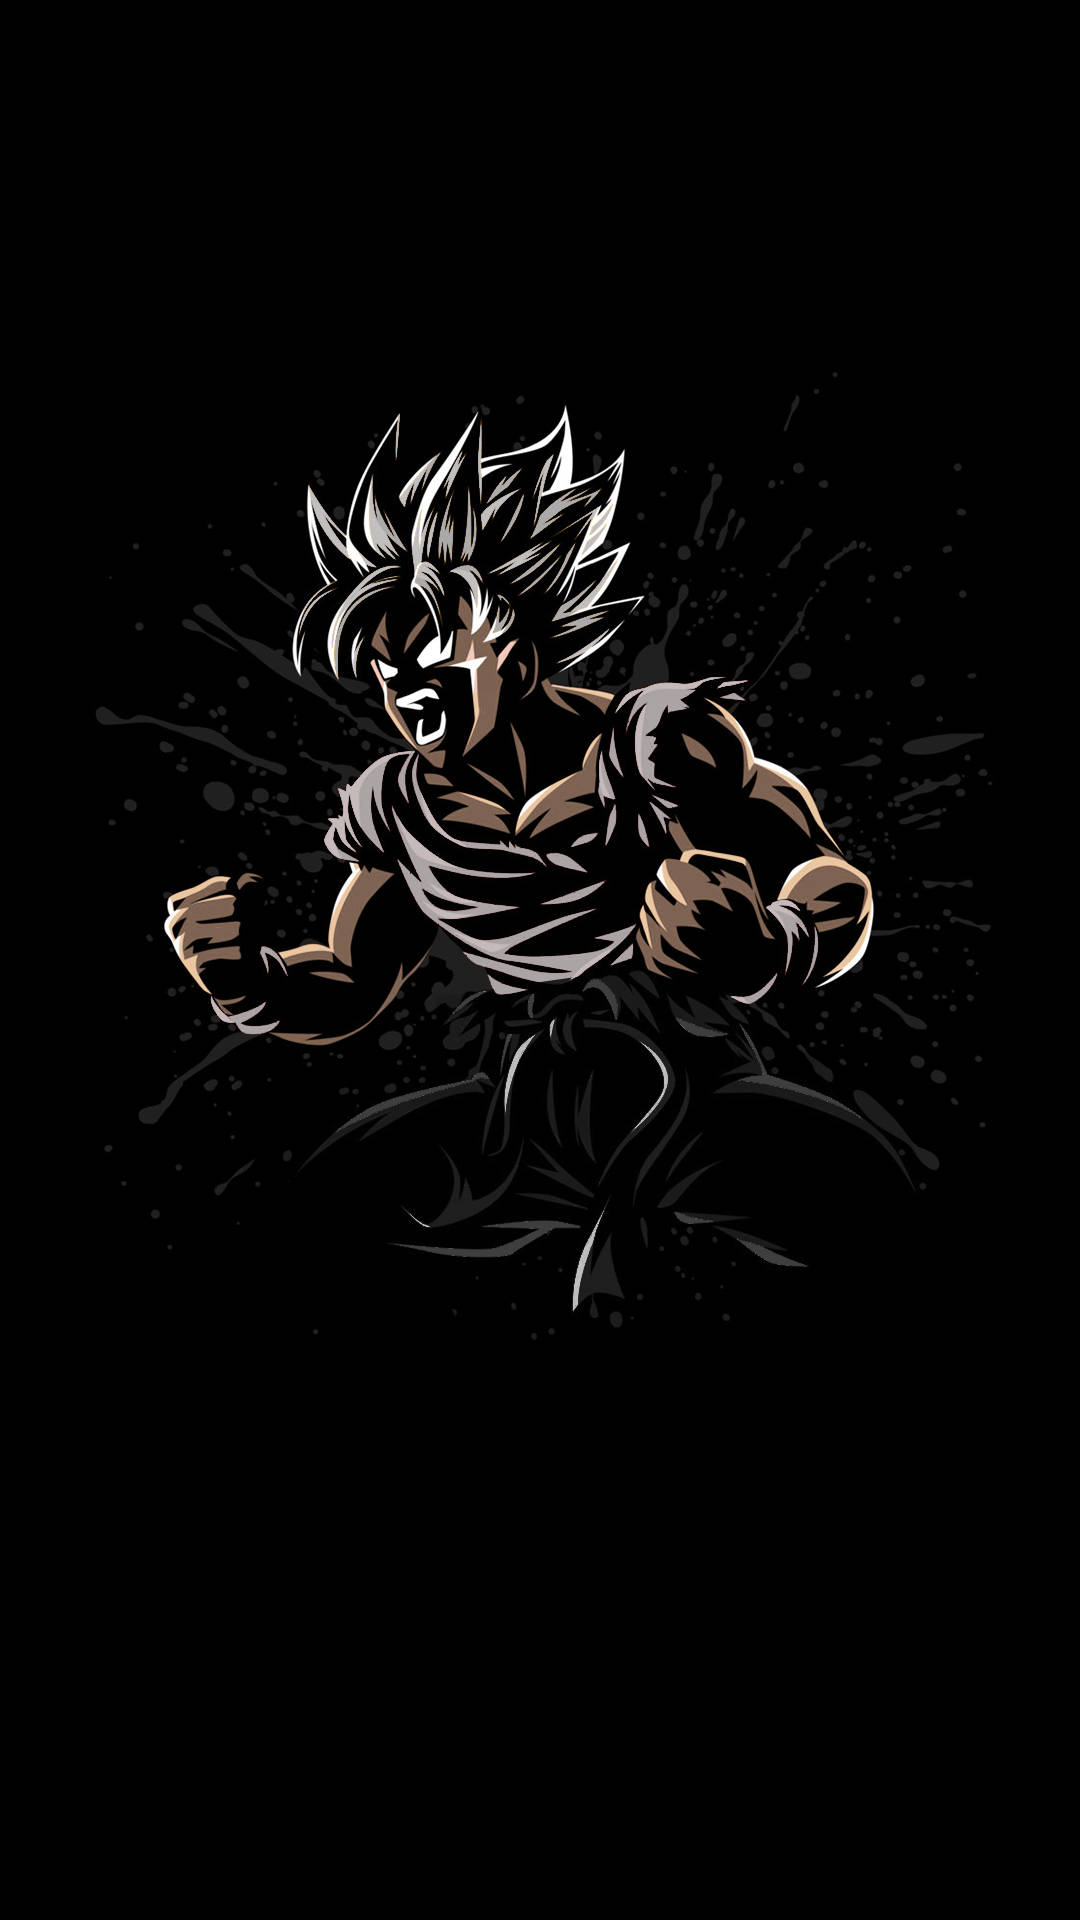 "Enhance Your Power with Goku Black and White" Wallpaper